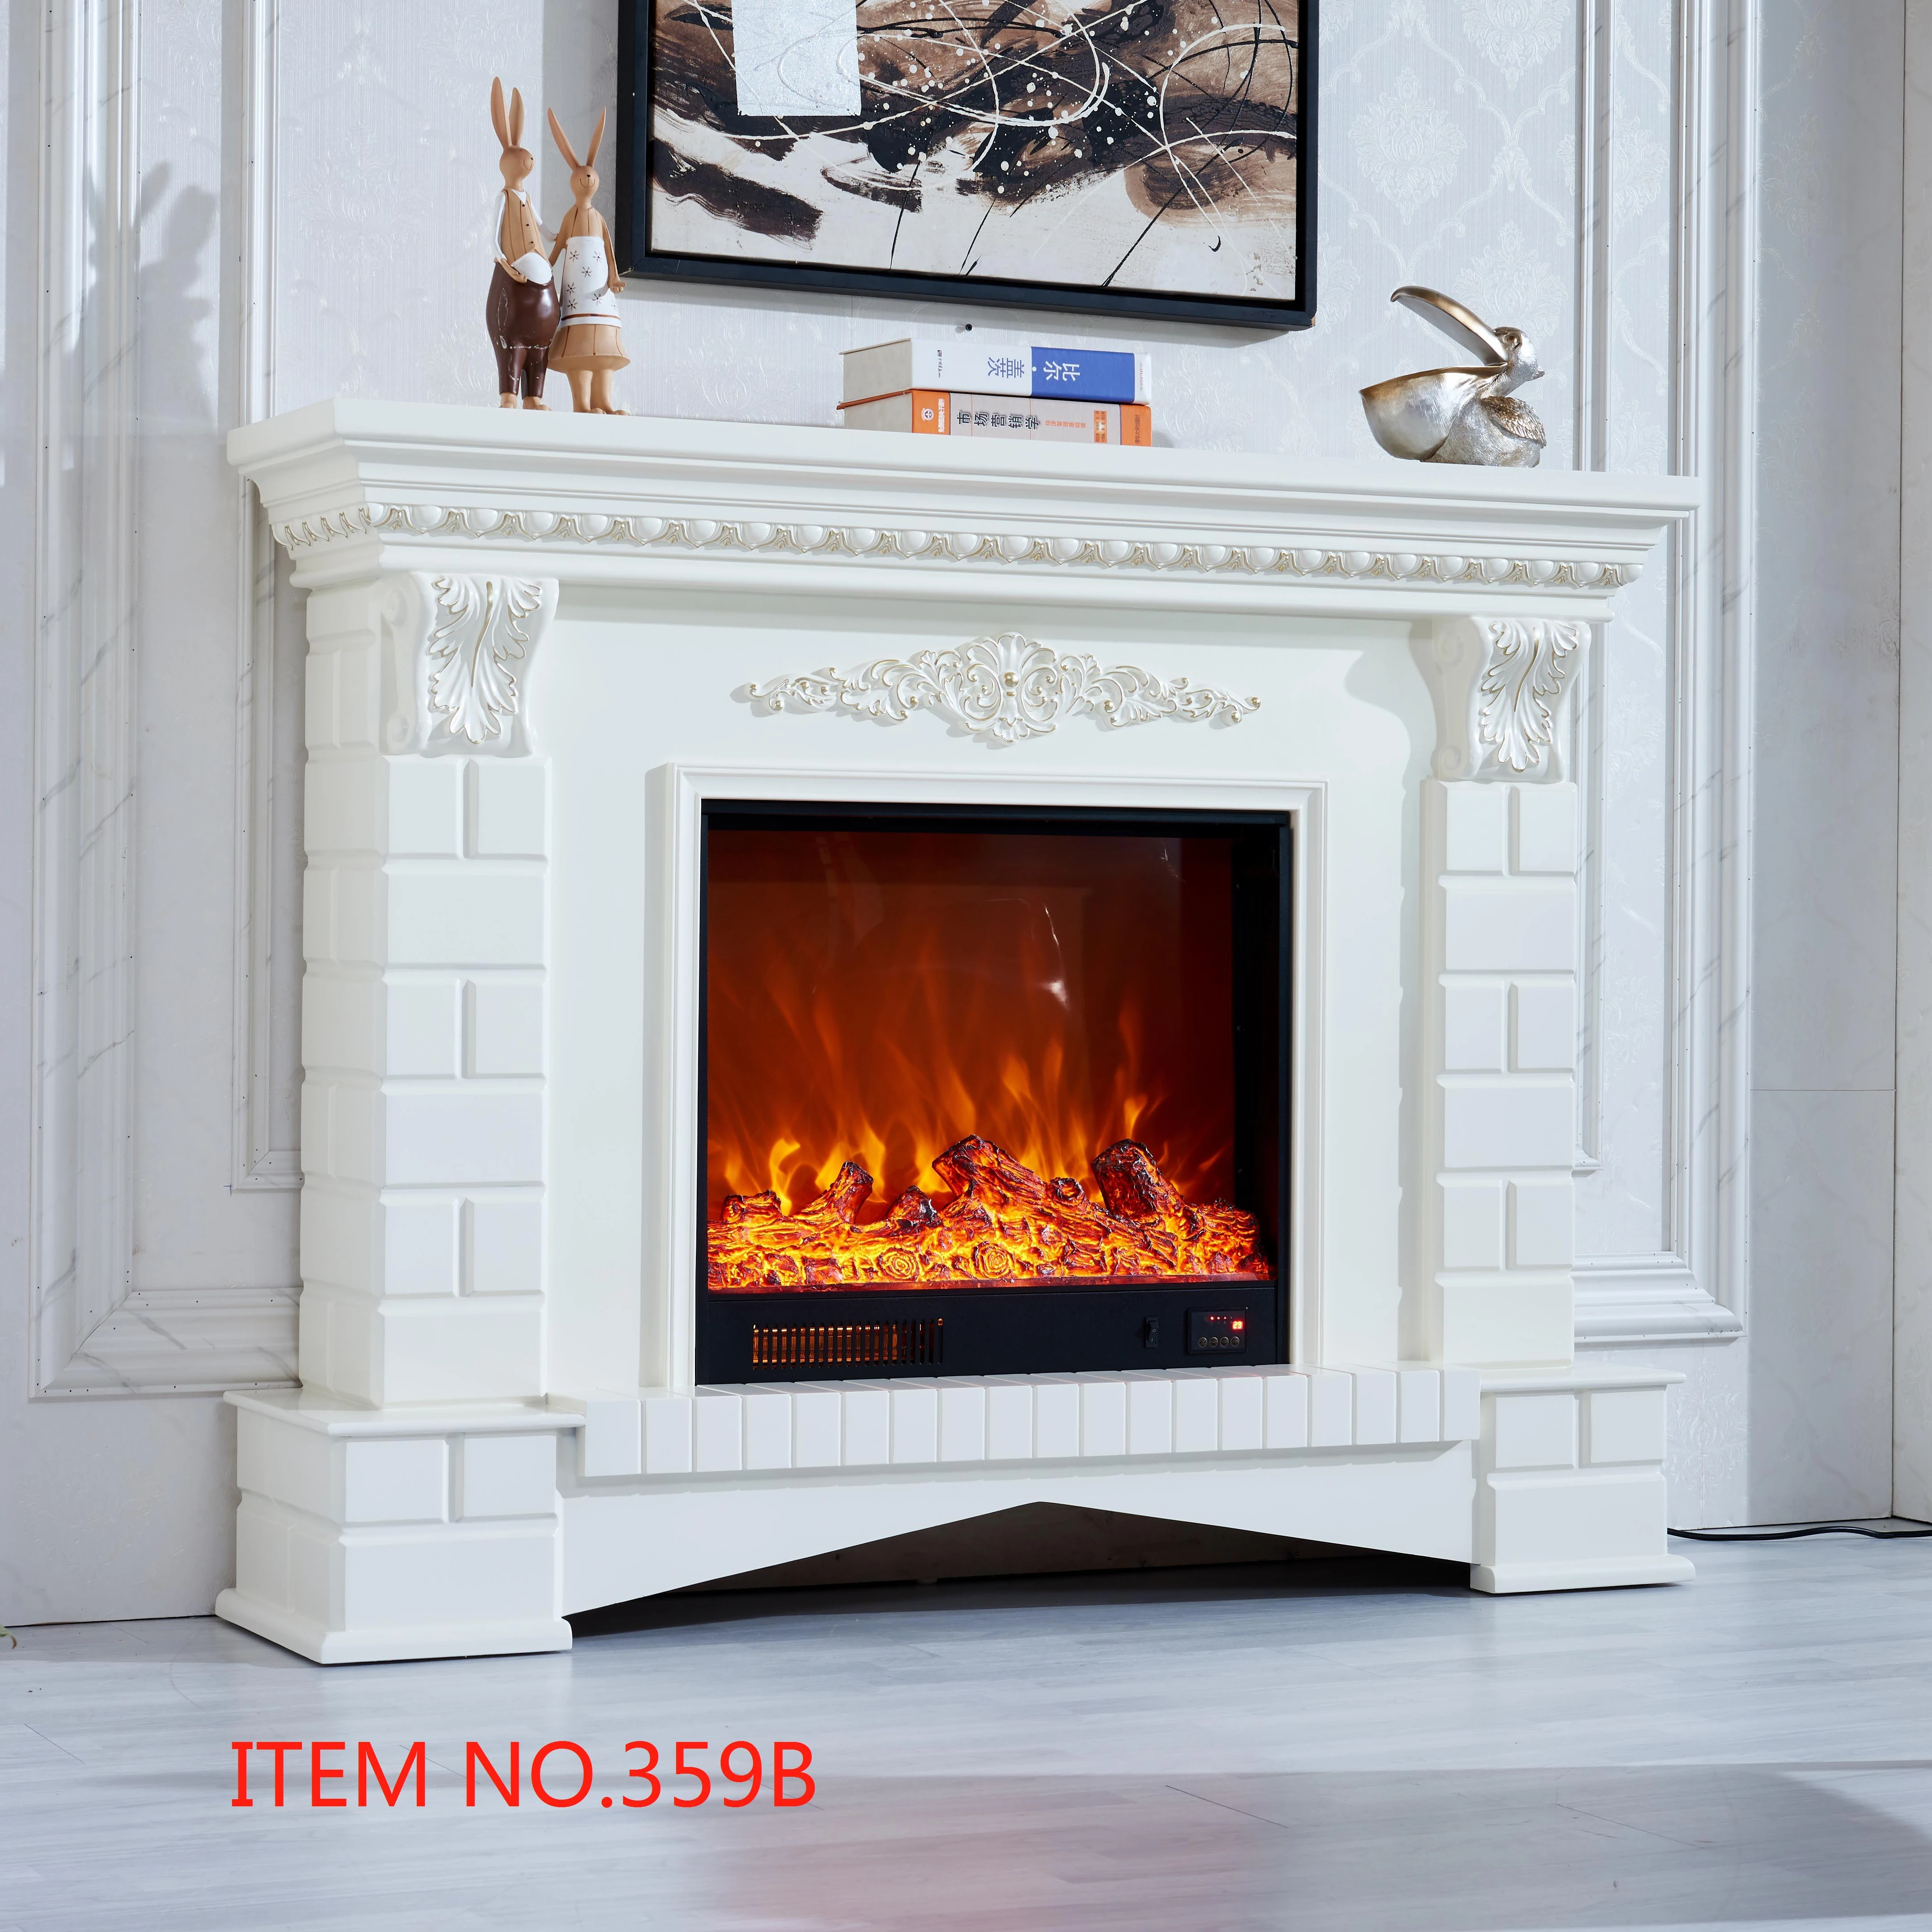 series 359 Effect of bricks resin carving heating stove electric flame effect fireplace